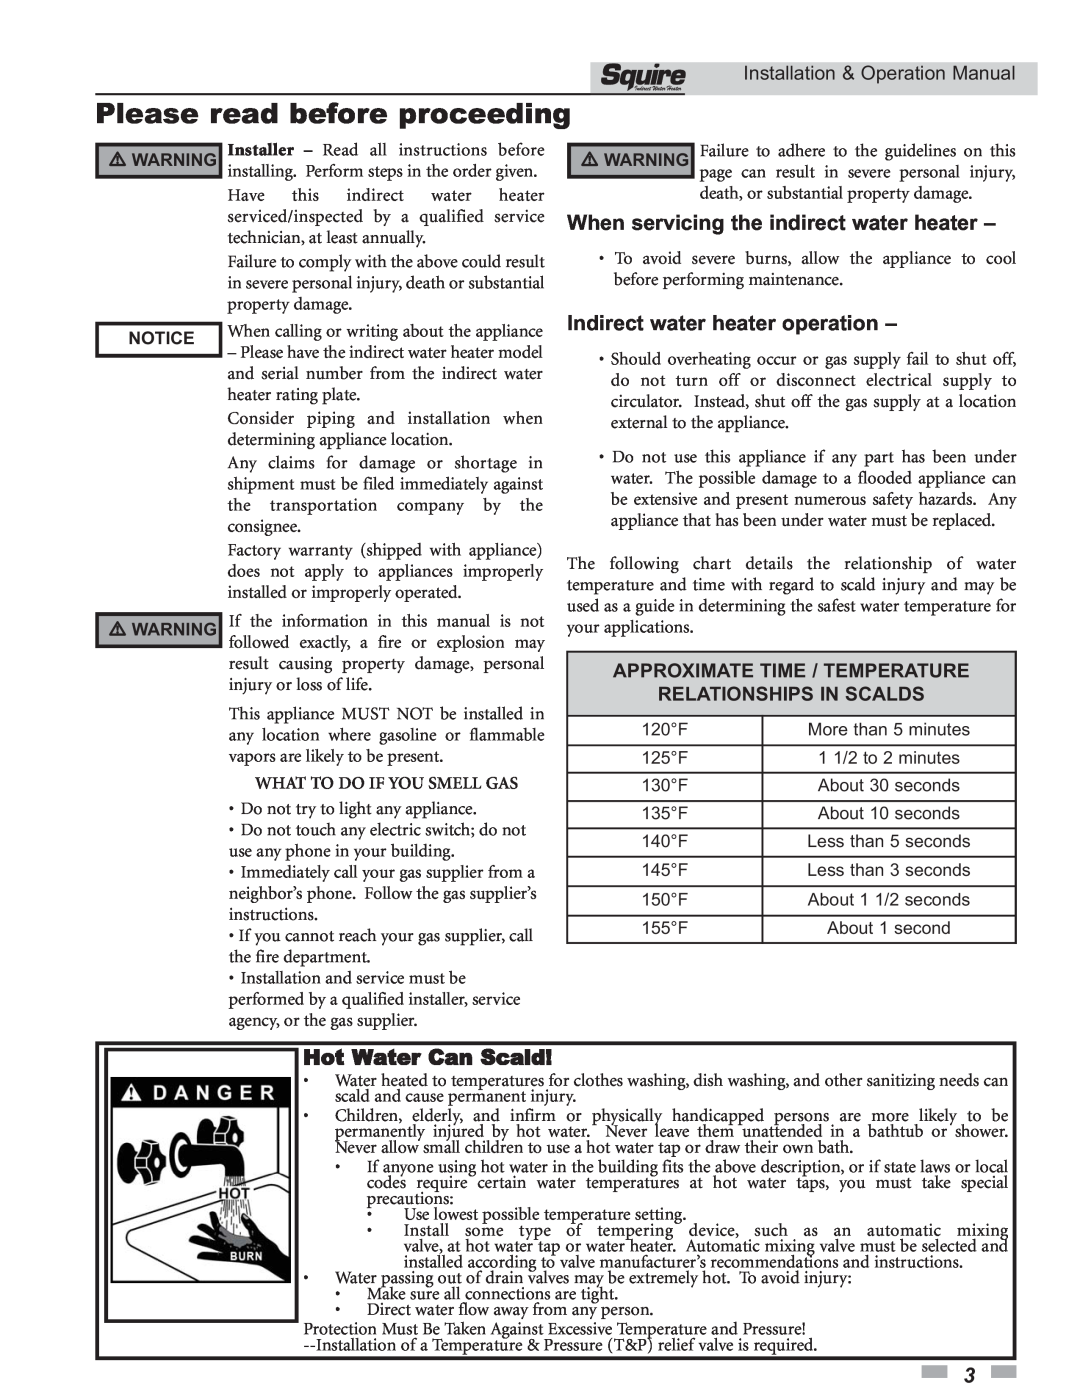 Lochinvar SSS031 Please read before proceeding, When servicing the indirect water heater, Indirect water heater operation 